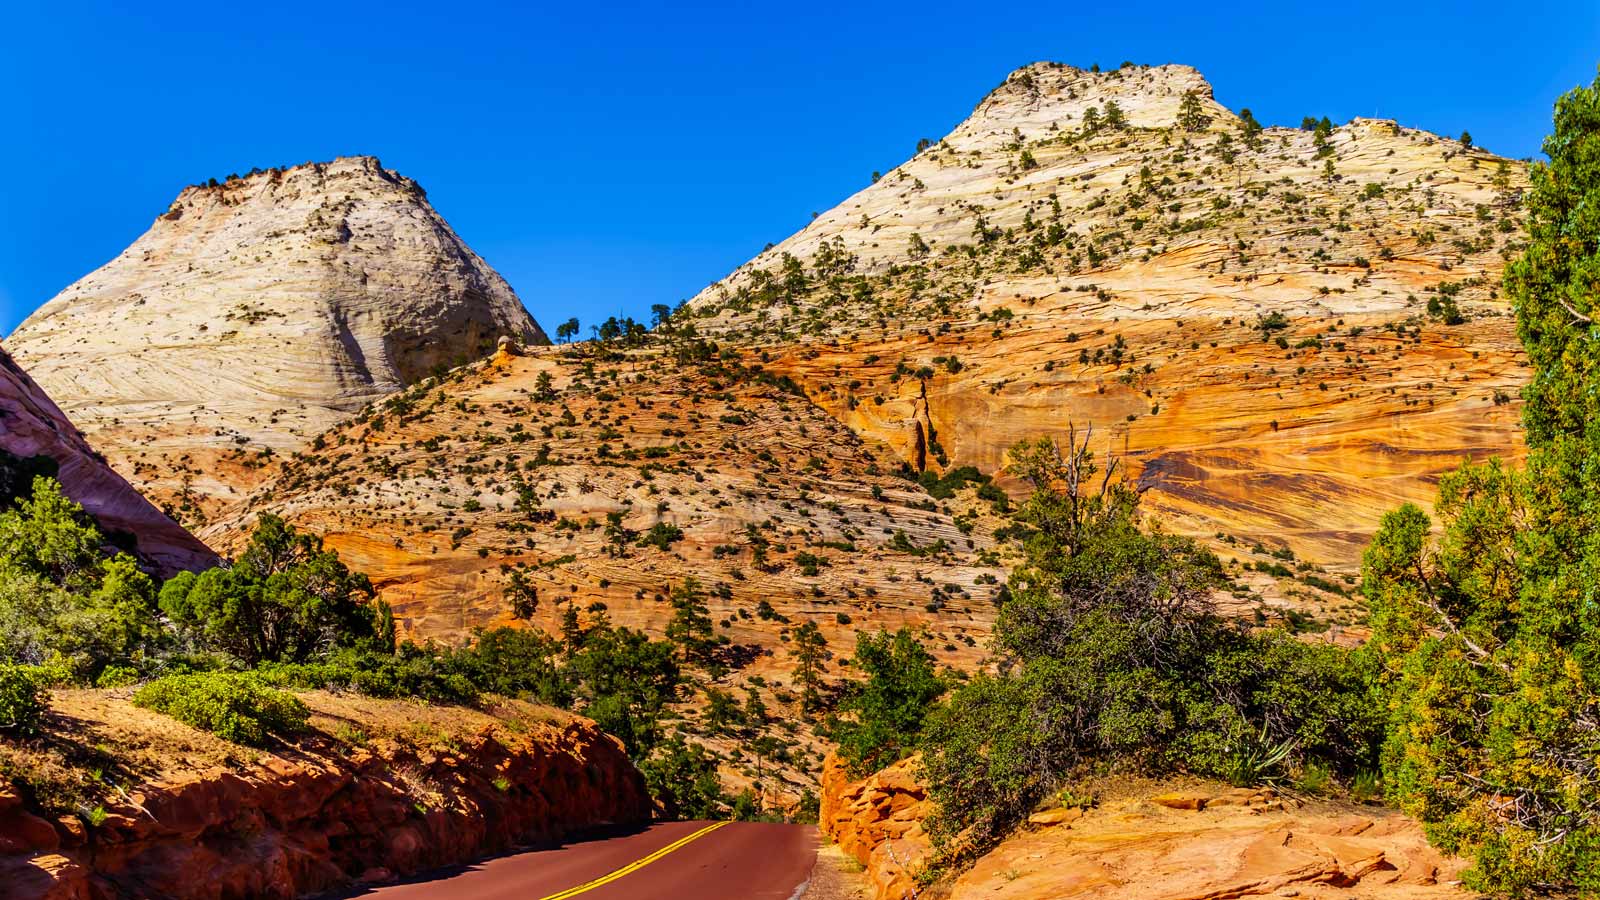 East Rim Trail in Zion National Park